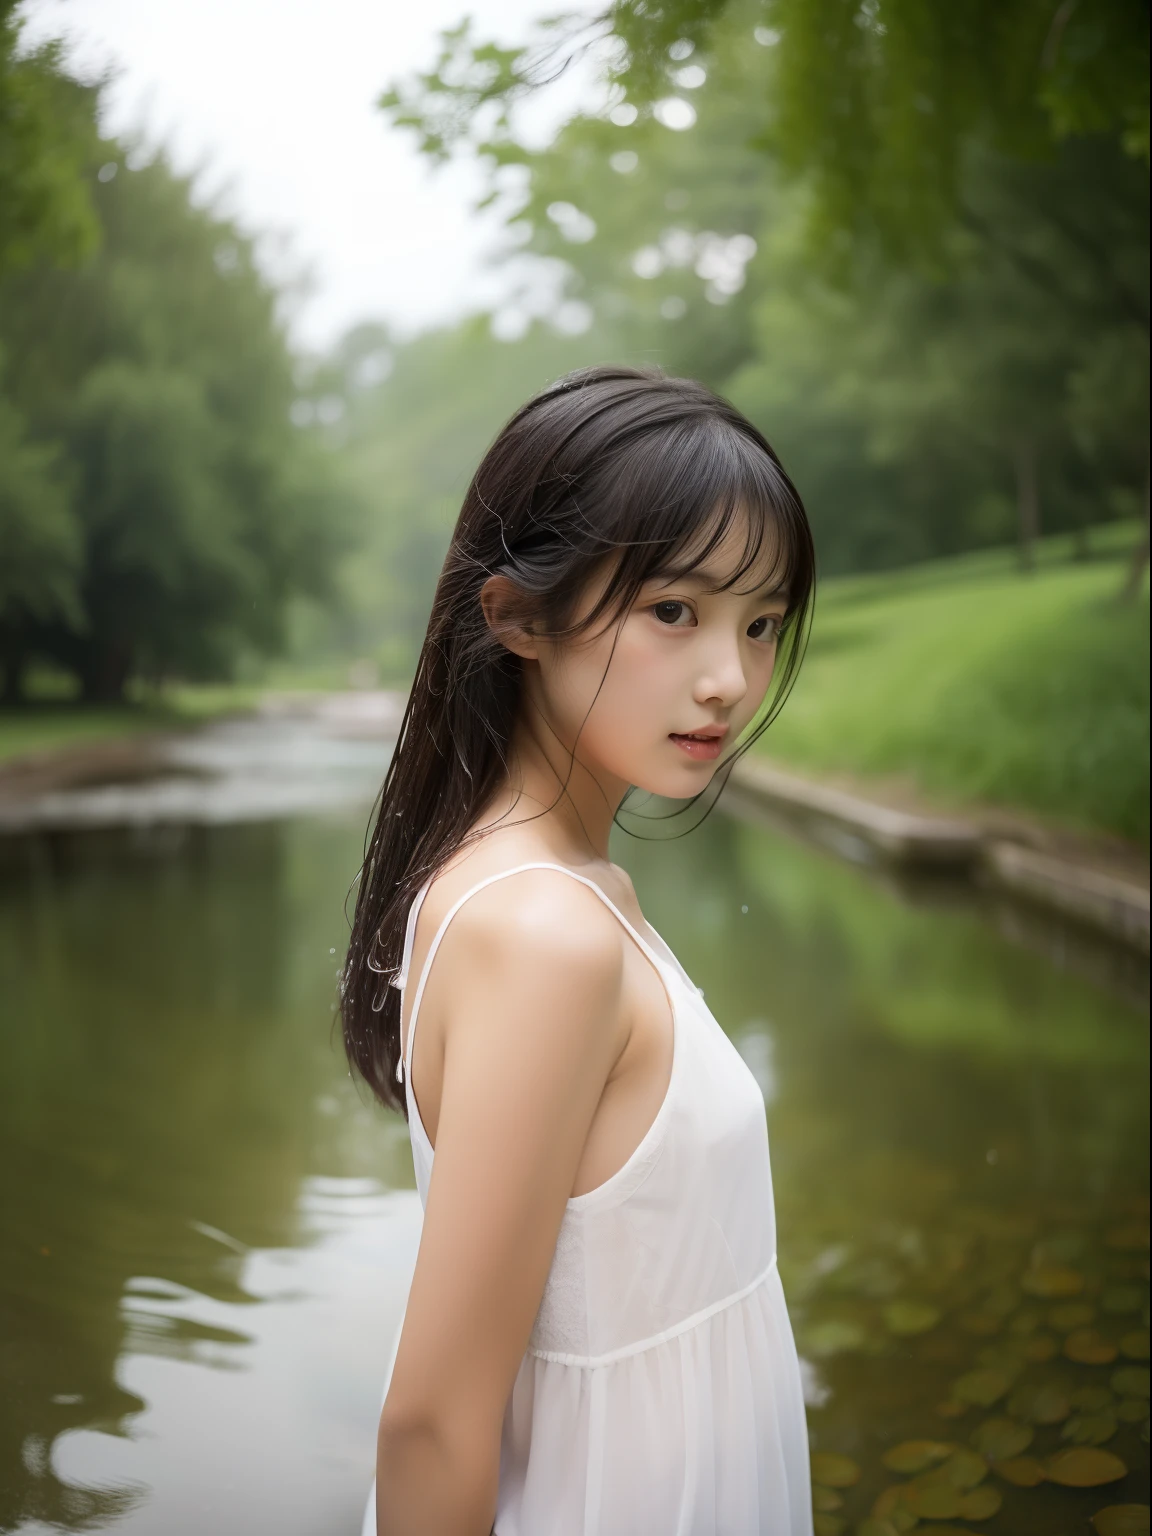 Beautuful Women、12year old 、Half body shot、perspiring、the body gets wet